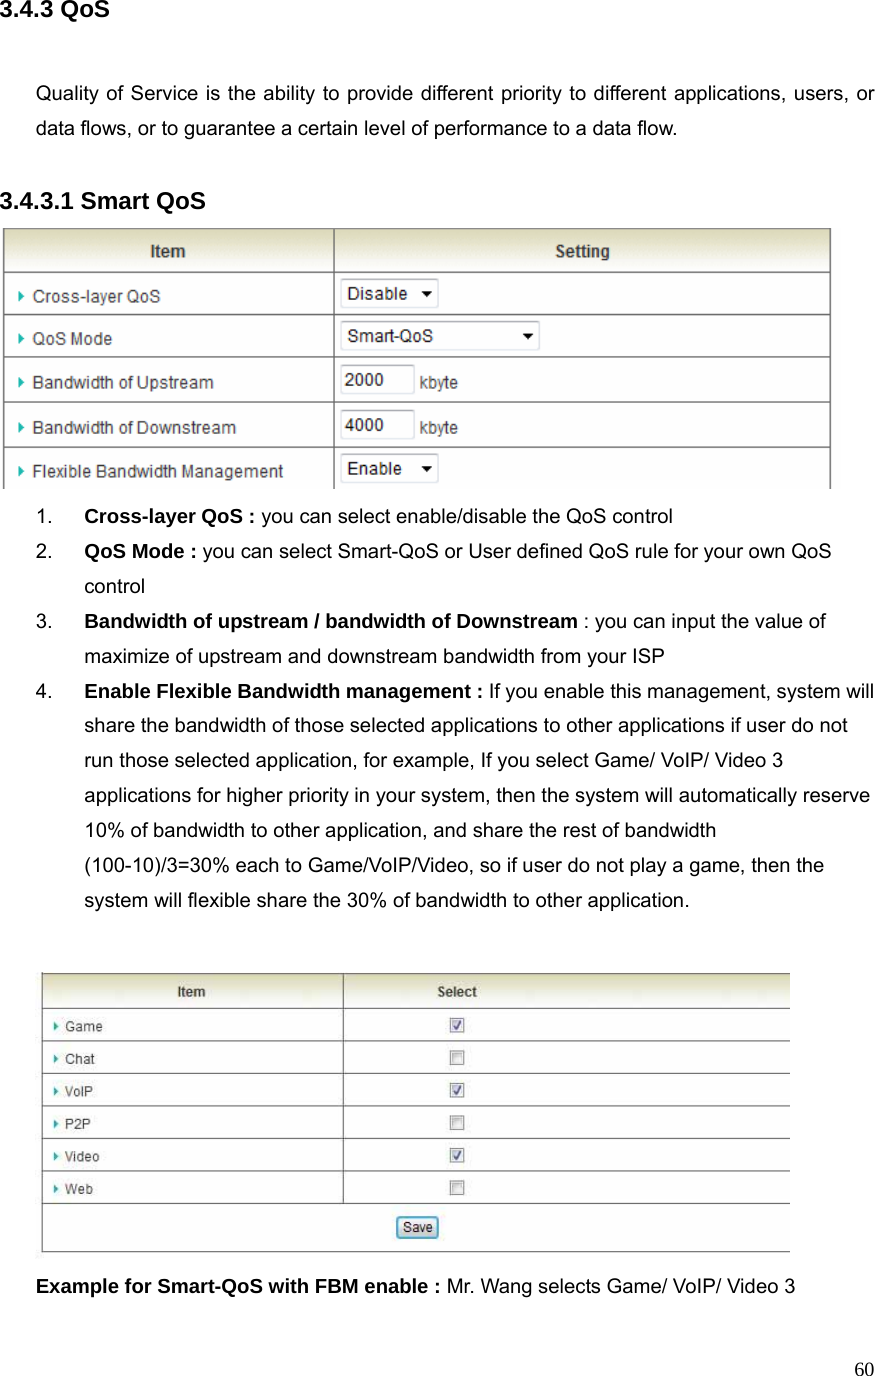  603.4.3 QoS   Quality of Service is the ability to provide different priority to different applications, users, or data flows, or to guarantee a certain level of performance to a data flow.  3.4.3.1 Smart QoS  1.  Cross-layer QoS : you can select enable/disable the QoS control 2.  QoS Mode : you can select Smart-QoS or User defined QoS rule for your own QoS control 3.  Bandwidth of upstream / bandwidth of Downstream : you can input the value of maximize of upstream and downstream bandwidth from your ISP 4.  Enable Flexible Bandwidth management : If you enable this management, system will share the bandwidth of those selected applications to other applications if user do not run those selected application, for example, If you select Game/ VoIP/ Video 3 applications for higher priority in your system, then the system will automatically reserve 10% of bandwidth to other application, and share the rest of bandwidth   (100-10)/3=30% each to Game/VoIP/Video, so if user do not play a game, then the system will flexible share the 30% of bandwidth to other application.     Example for Smart-QoS with FBM enable : Mr. Wang selects Game/ VoIP/ Video 3 